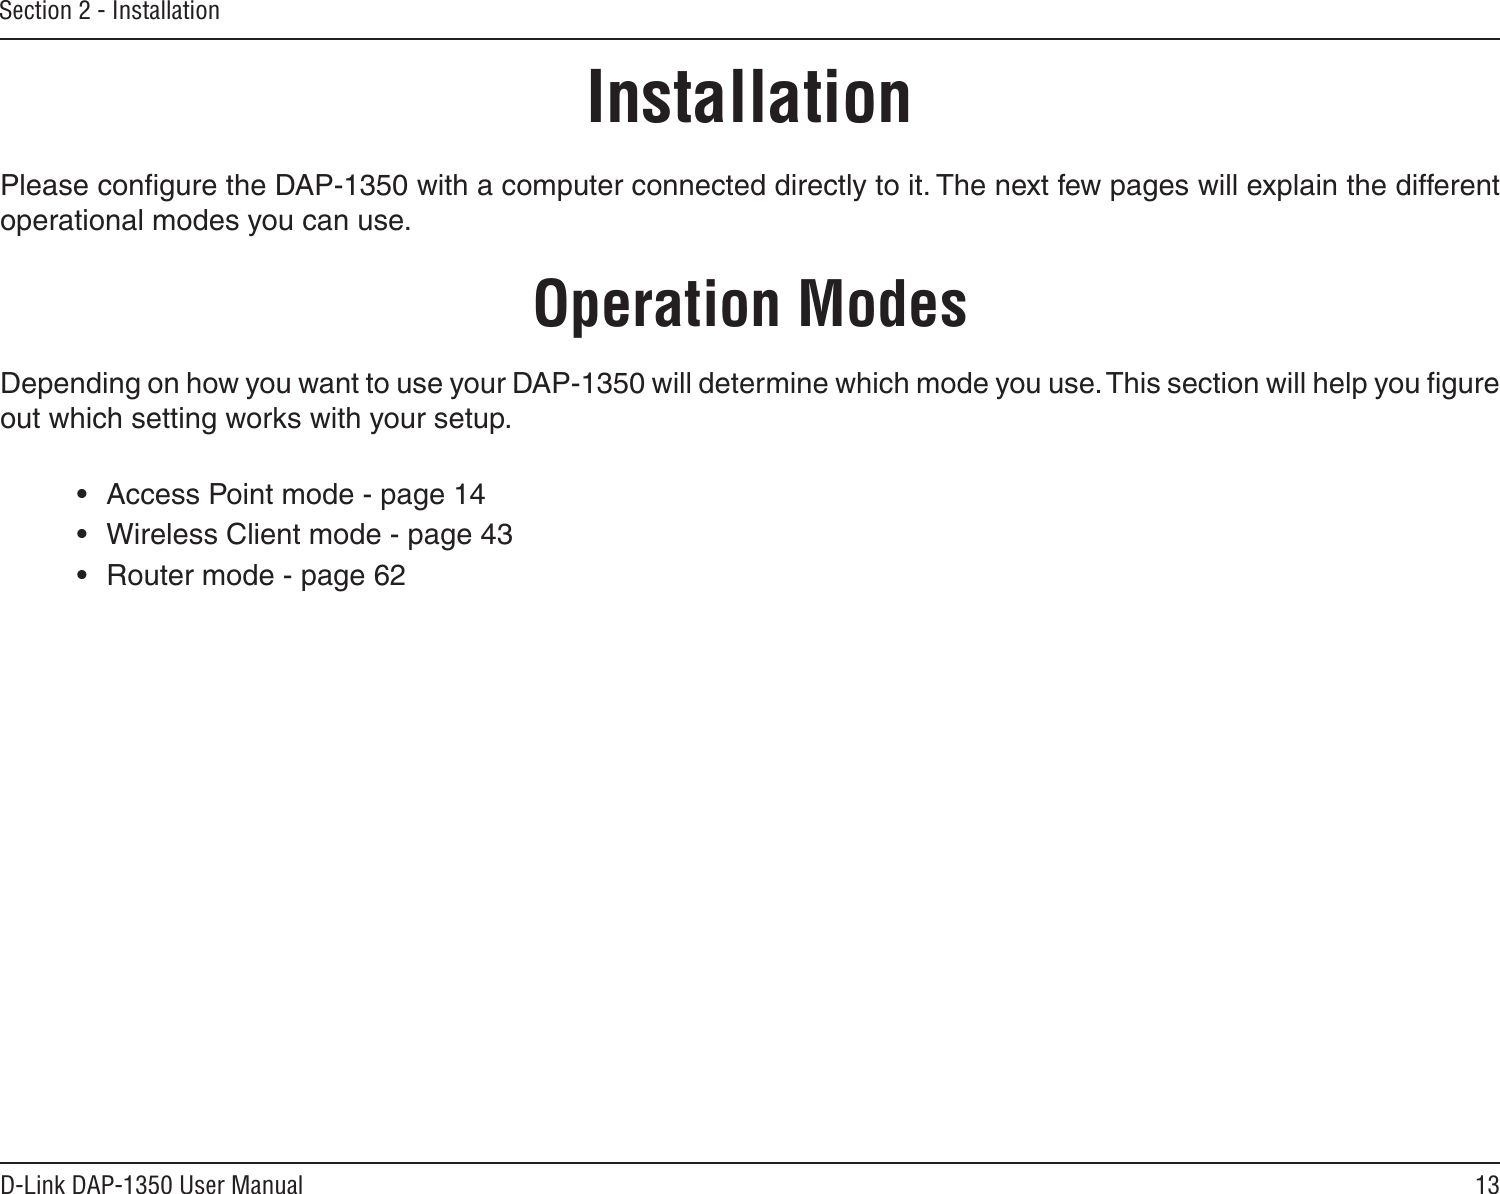 13D-Link DAP-1350 User ManualSection 2 - InstallationInstallationPlease conﬁgure the DAP-1350 with a computer connected directly to it. The next few pages will explain the different operational modes you can use. Operation ModesDepending on how you want to use your DAP-1350 will determine which mode you use. This section will help you ﬁgure out which setting works with your setup.•  Access Point mode - page 14•  Wireless Client mode - page 43•  Router mode - page 62